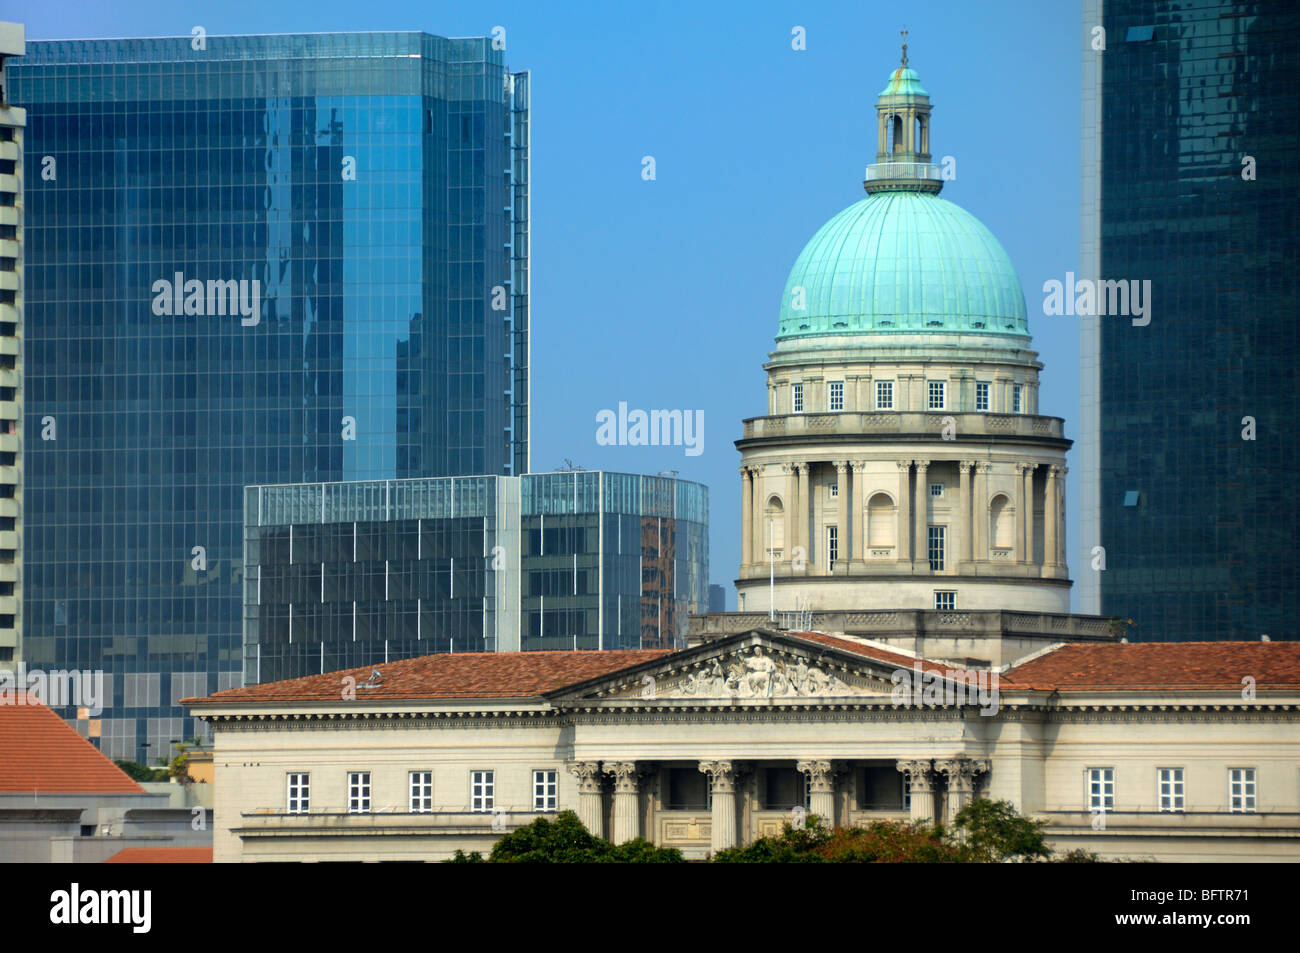 Dome or Cupola of the Neoclassical Colonial Old or Former Supreme Court Building (1937-39) now the National Gallery Museum Singapore Stock Photo